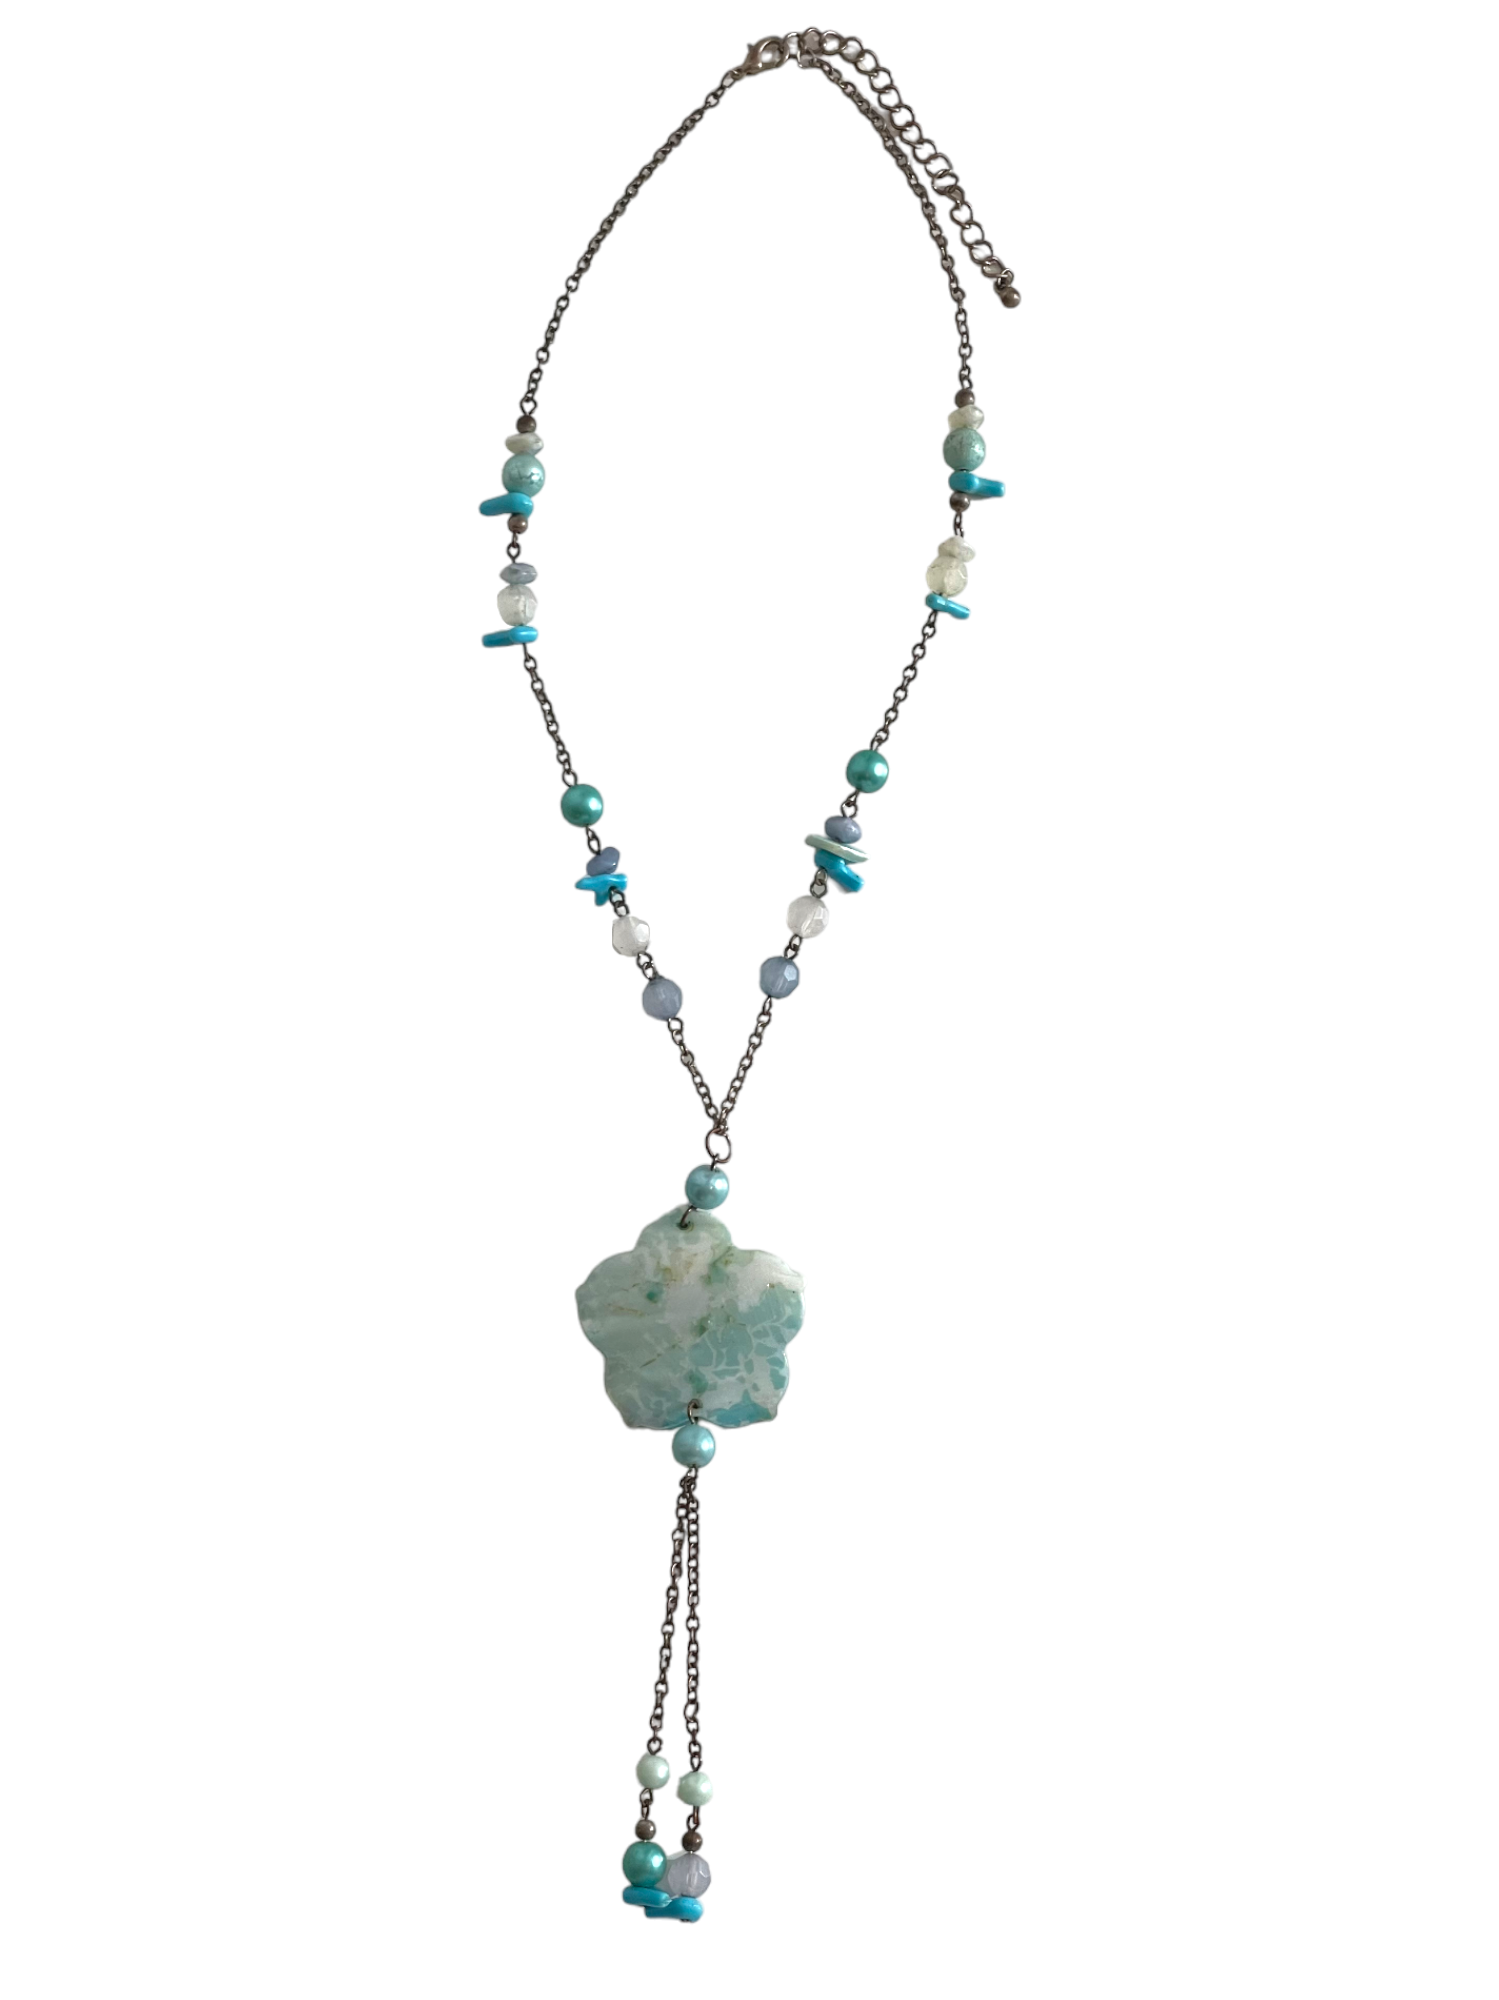 Blue Flower & Beads Necklace